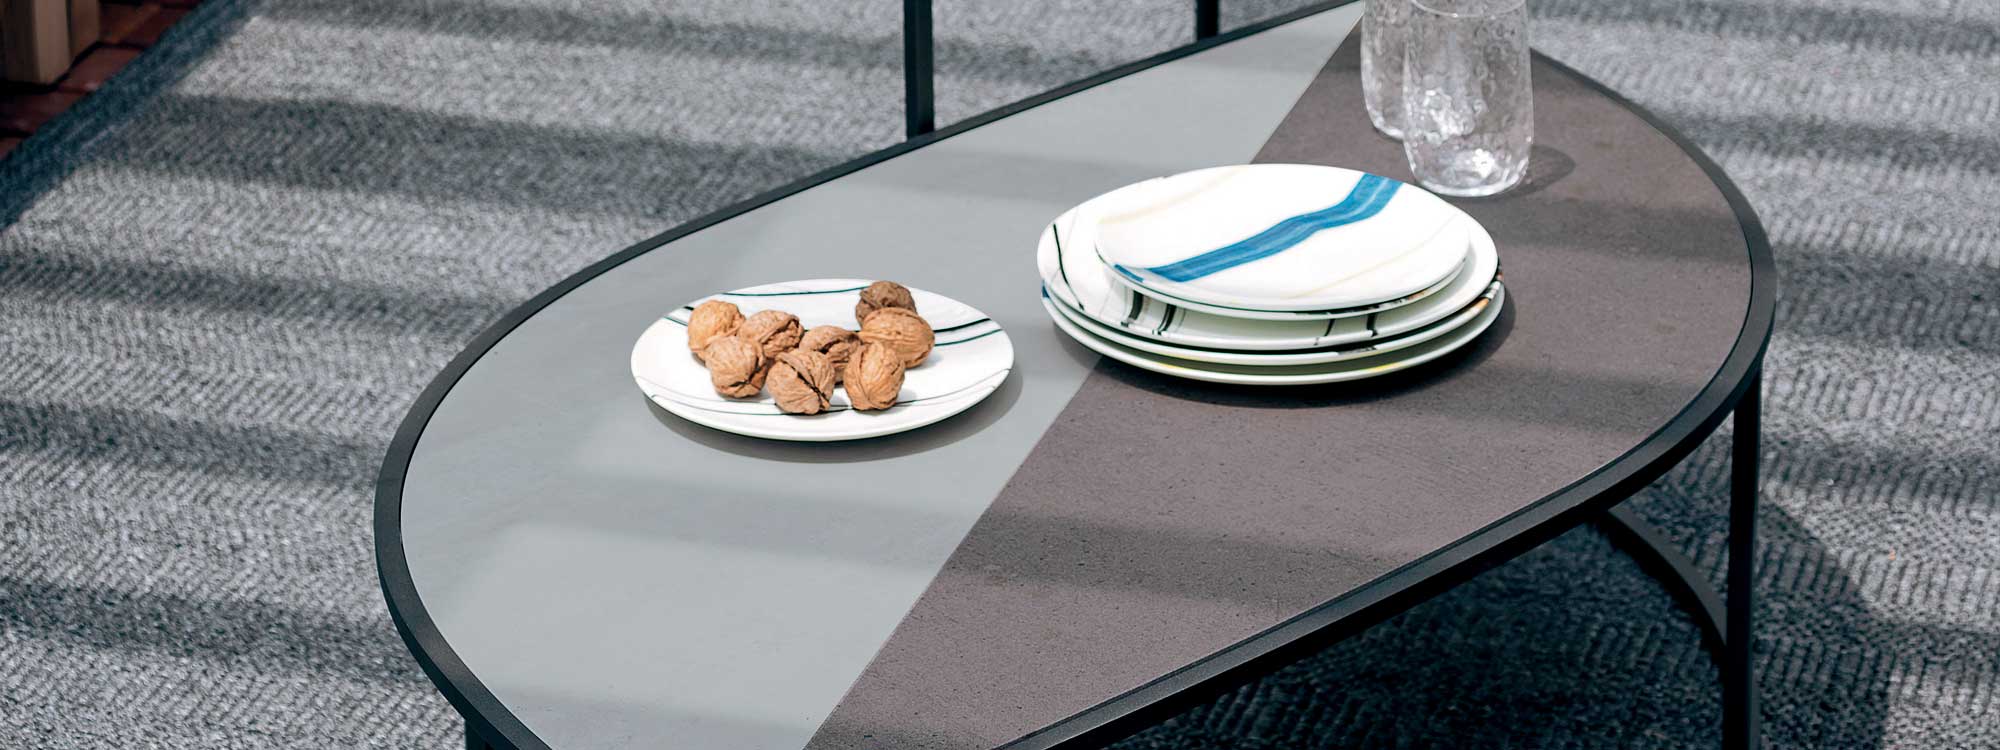 Image of RODA Leaf minimalist outdoor low table with plate of walnuts and glasses on top